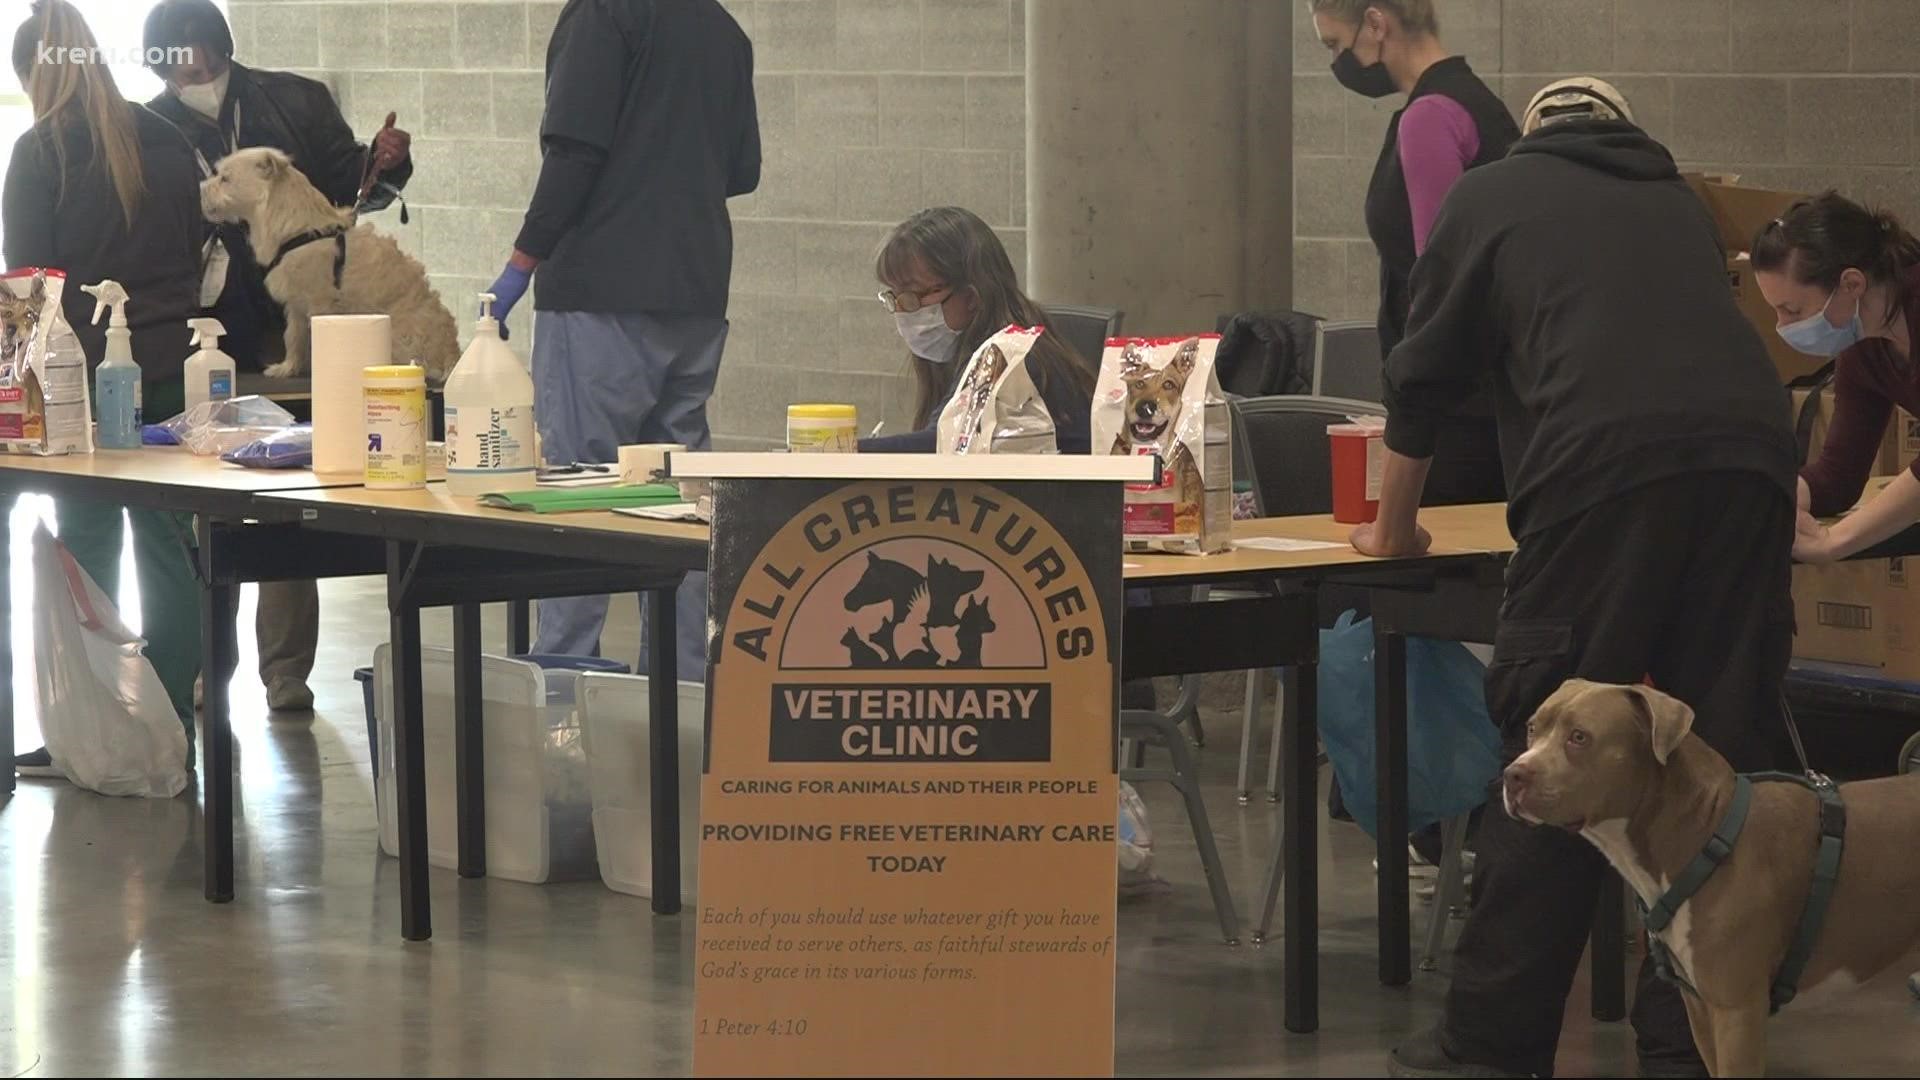 The Spokane Homeless Connect returned this year with more than 90 vendors at the Spokane Convention Center.